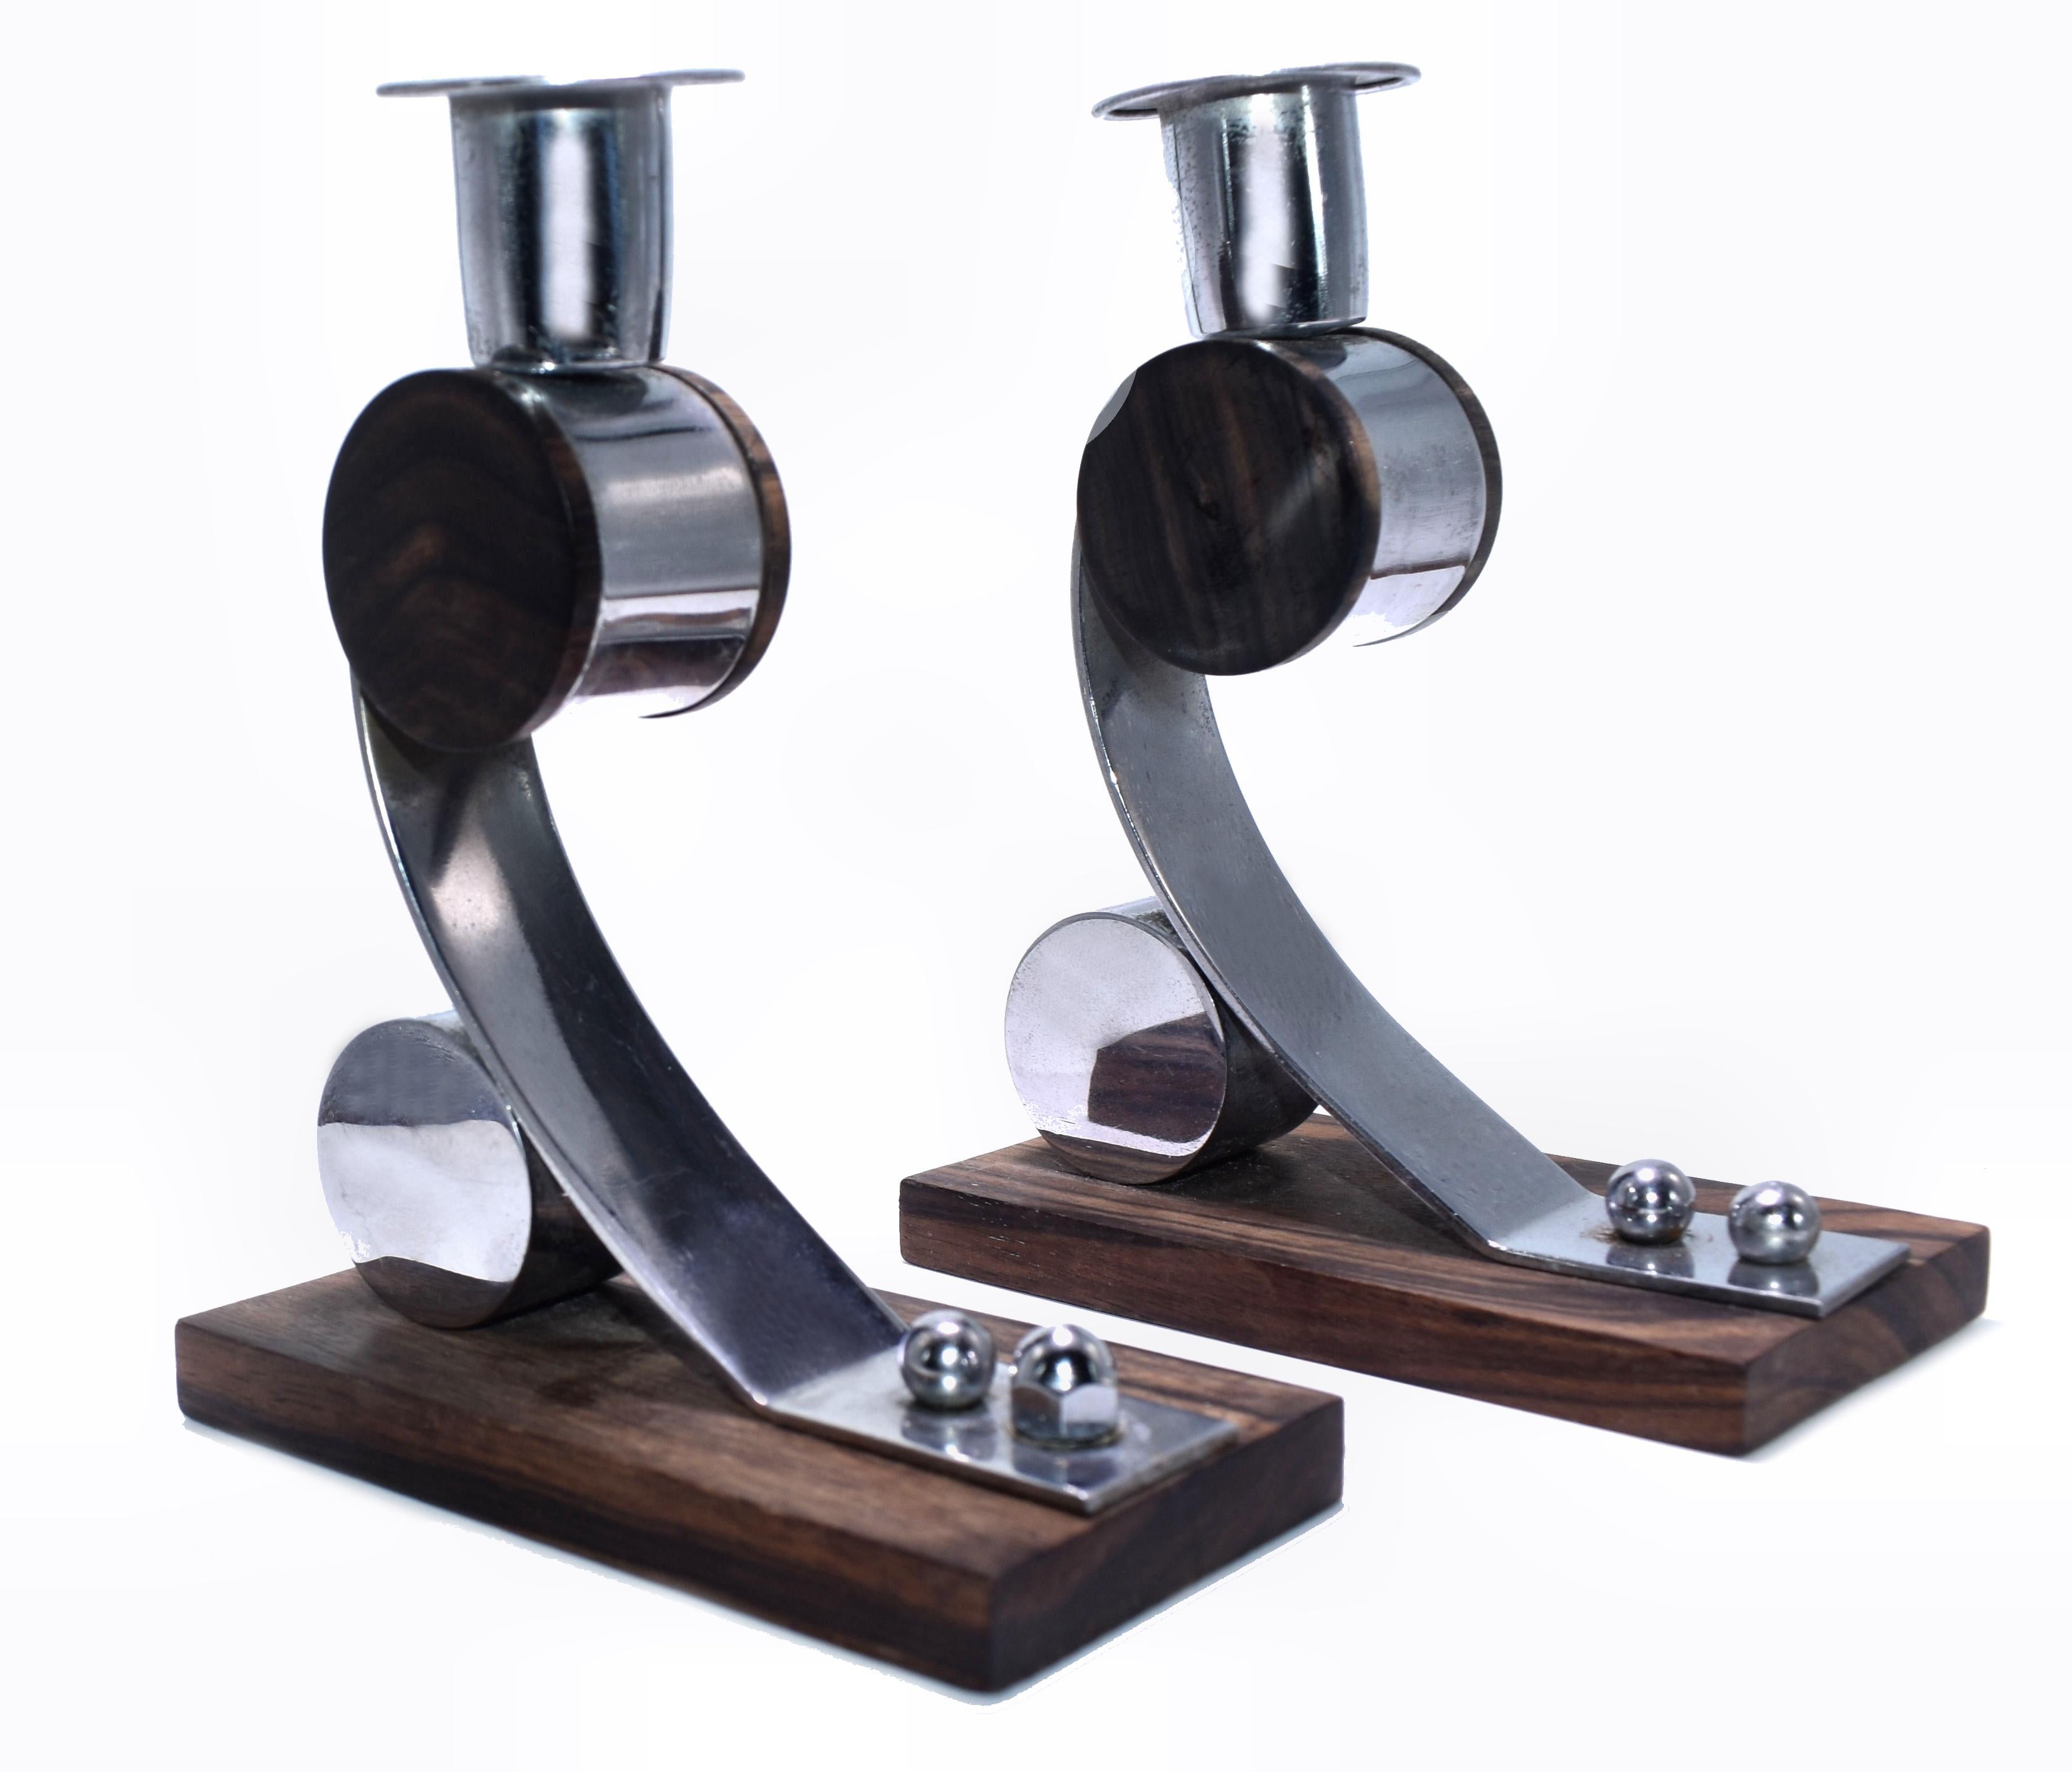 Modernist original Art Deco pair of matching candlesticks dating to the 1930s and originating from France. Made from chrome and Macassar ebony, beautiful and well crafted design.